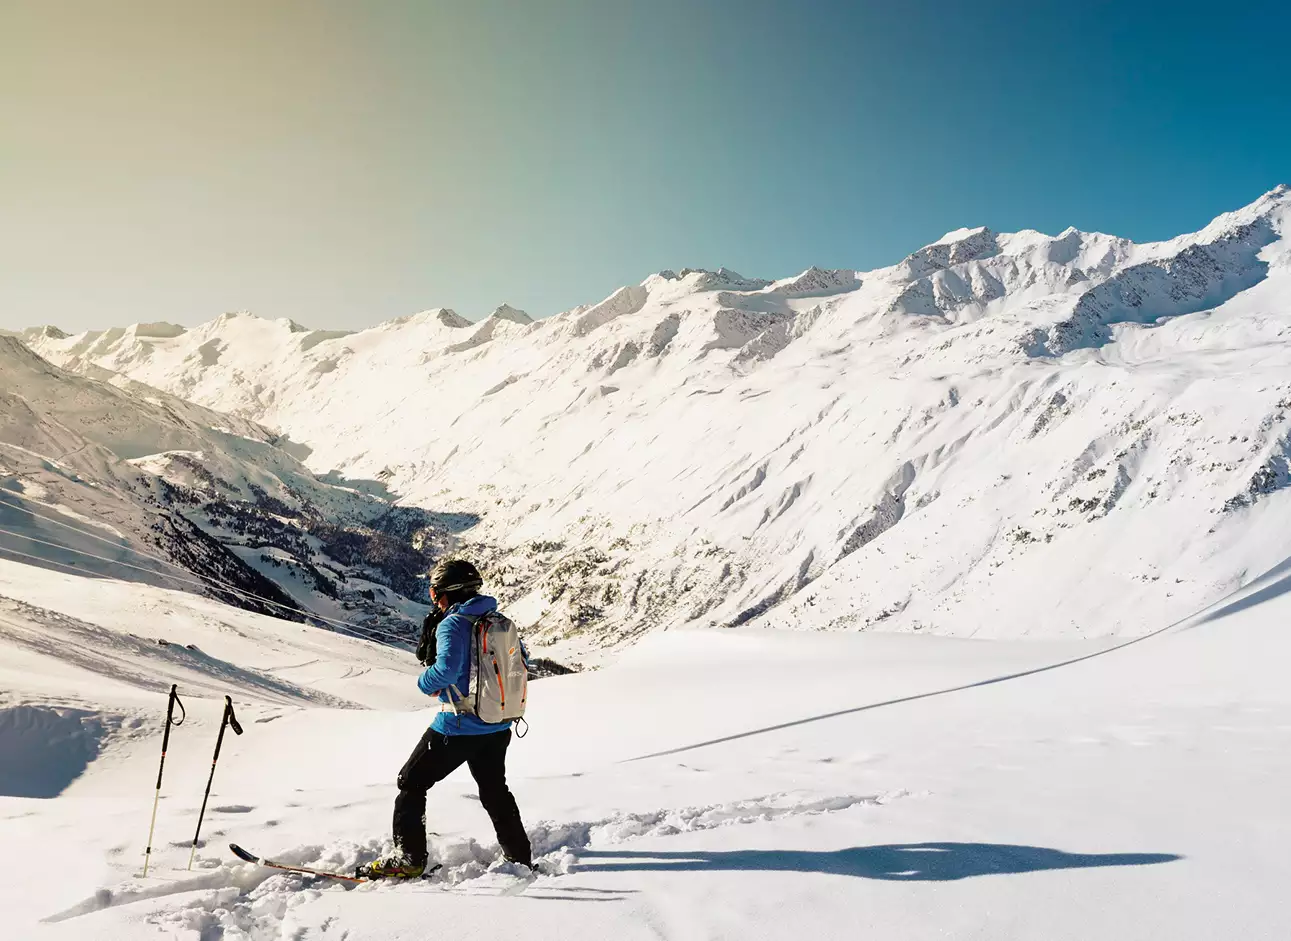 Skiing - Hit the slopes and enjoy thrilling winter sports adventures